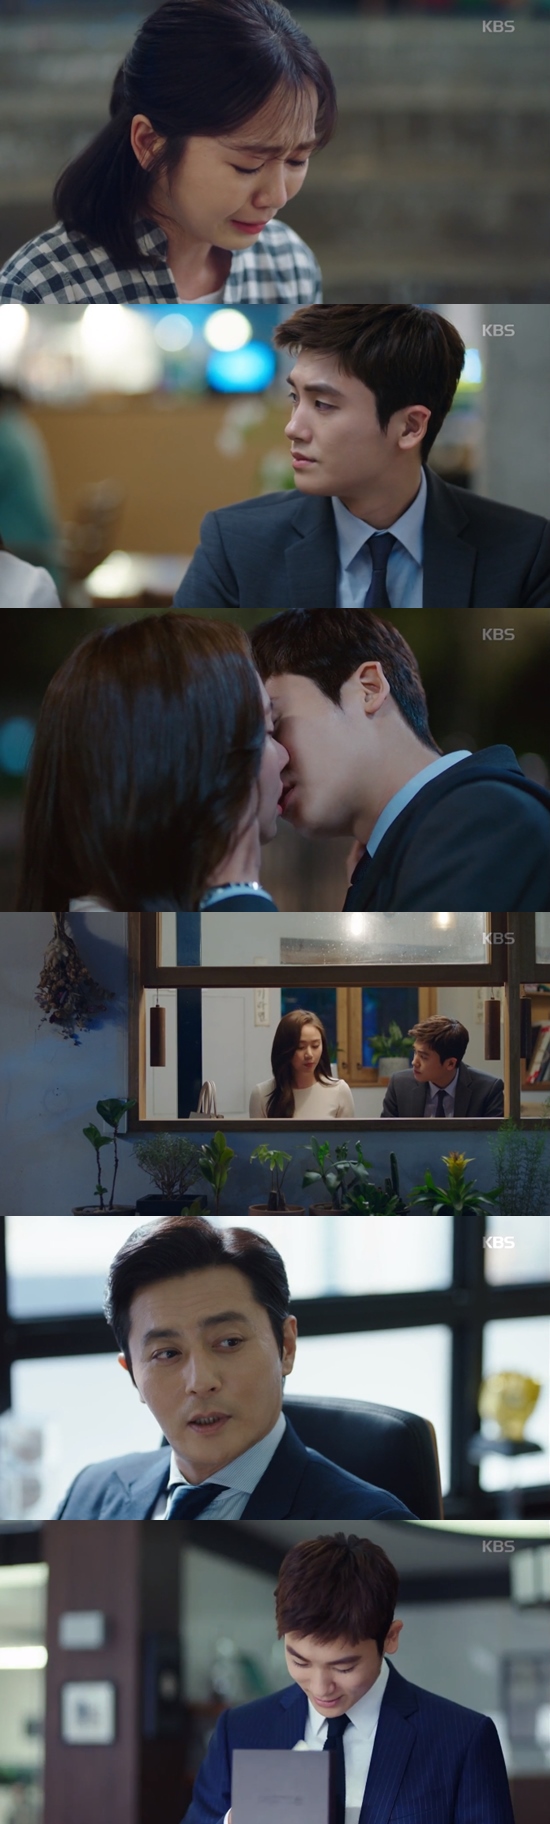 Suits Park Hyeong-sik has grown one step further, catching up with work and love.In the KBS 2TV drama Suits broadcast on the last 30 days, Ko Yeon-woo (Park Hyeong-sik), who solved his first single case, was portrayed.On this day, Ko Yeon-woo redecorated from head to toe ahead of the first solo case, taking off his sneakers, wearing shoes, and putting on a new suit.His case was a plagiarism of aspiring writers and publishers.When Synopsys, who appeared in the contest several years ago, came out in the name of another writer, Park Sang-yon filed a plagiarism lawsuit.Ko met an aspiring writer after being commissioned by a publisher, who was told that what he wanted was compensation and offered the publisher 50 million won in compensation.But what Park Sang-yoon wanted was not just money, but a sincere apology from the publishers president, who turned out to have been sexually assaulted at the time of Synopsys.The publishers president is a client, but Ko thought on the side of Park Sang-yoon.He thought of a way to help the victim, even though it was an incident against the same client and could not solve the sexual assault case.In the end, Ko Yeon-woo had the evidence of the aspiring writer and persuaded the publisher to get both compensation and apology.In the process, Ko Yeon-woo also confirmed her affection with Kim Ji-na (Go Sung-hee), who had formed a strange air current since the first meeting, and quickly approached the case by solving the case together.I even kissed and shared my mind.He was also recognized by Choi Kang-seok (Jang Dong-gun), who made him a lawyer. Choi Kang-seok presented Ko Yeon-woo with a luxury watch and recognized him as a lawyer.In addition to the knowledge of memorizing all the codes, the lawyer Ko Yeon-woo has all the warm heart and empathy ability to do for the unfair person.While attention is being paid to how far his Cida performance will be unfolded, there are many people who have been pressing his weaknesses such as Kim Moon-hee (Son Yeo-eun) and Chae Geun-sik (Choi Ki-hwa), adding tension.Meanwhile, Suits is broadcast every Wednesday and Thursday at 10 pm.Photo = KBS 2TV broadcast screen